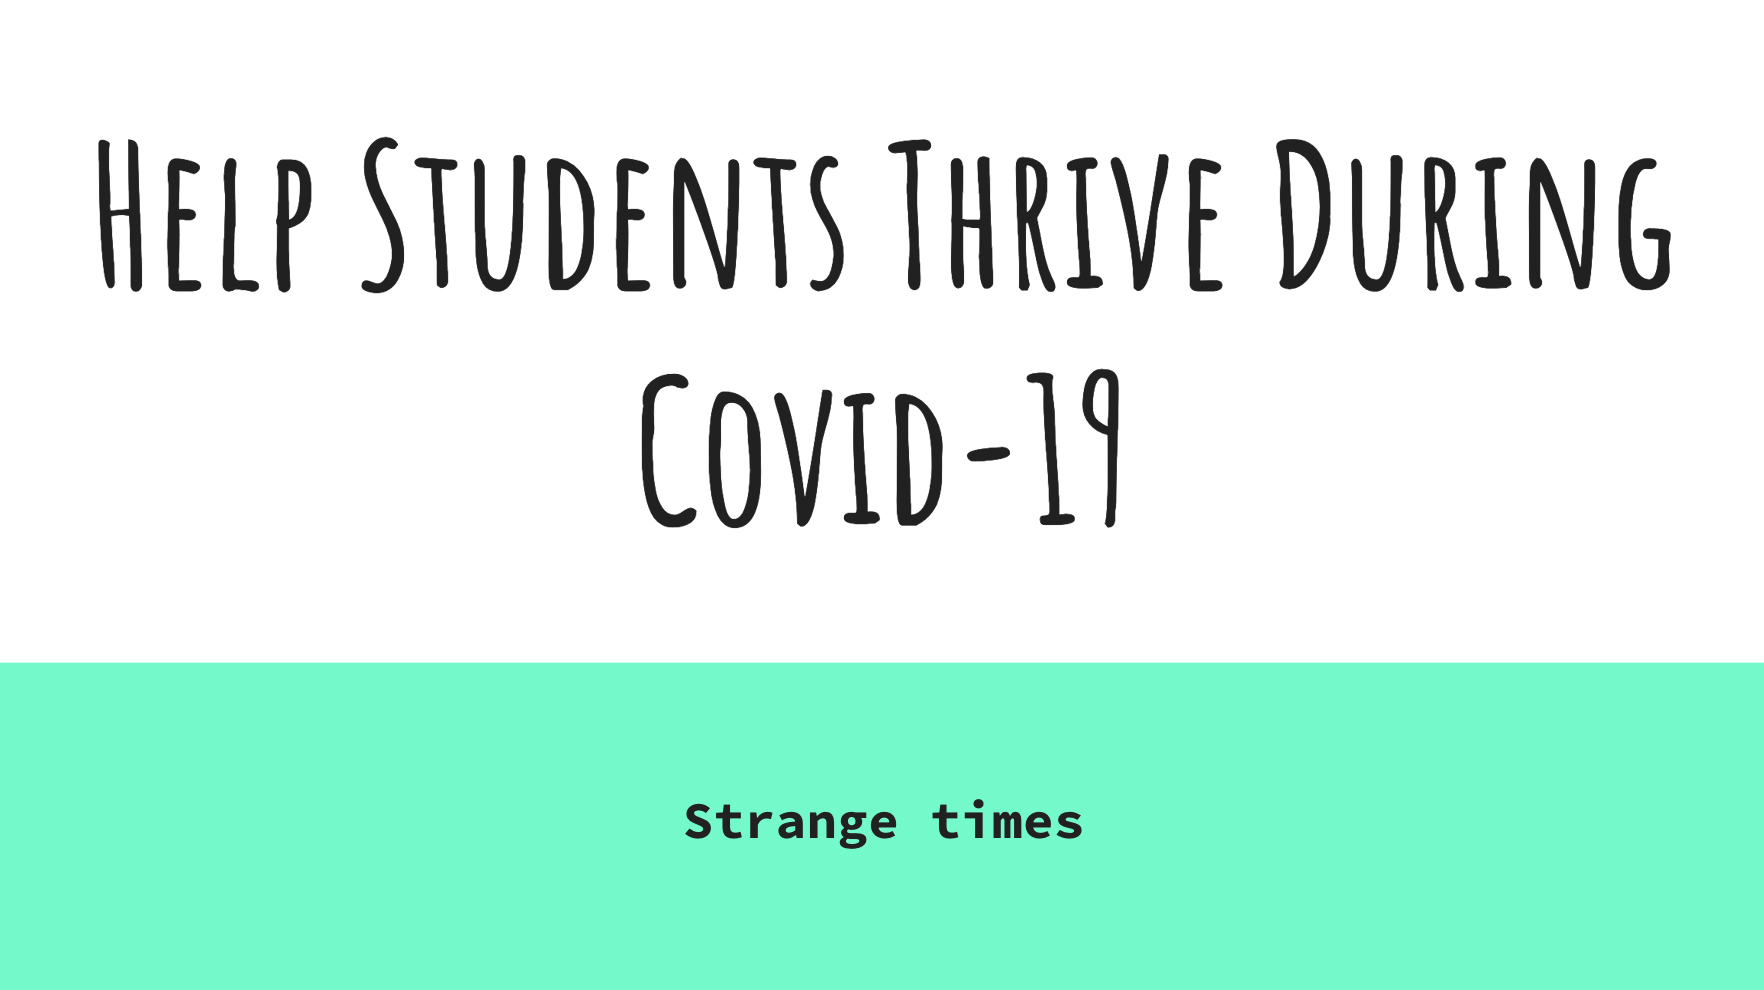 Supporting Students During Covid-19